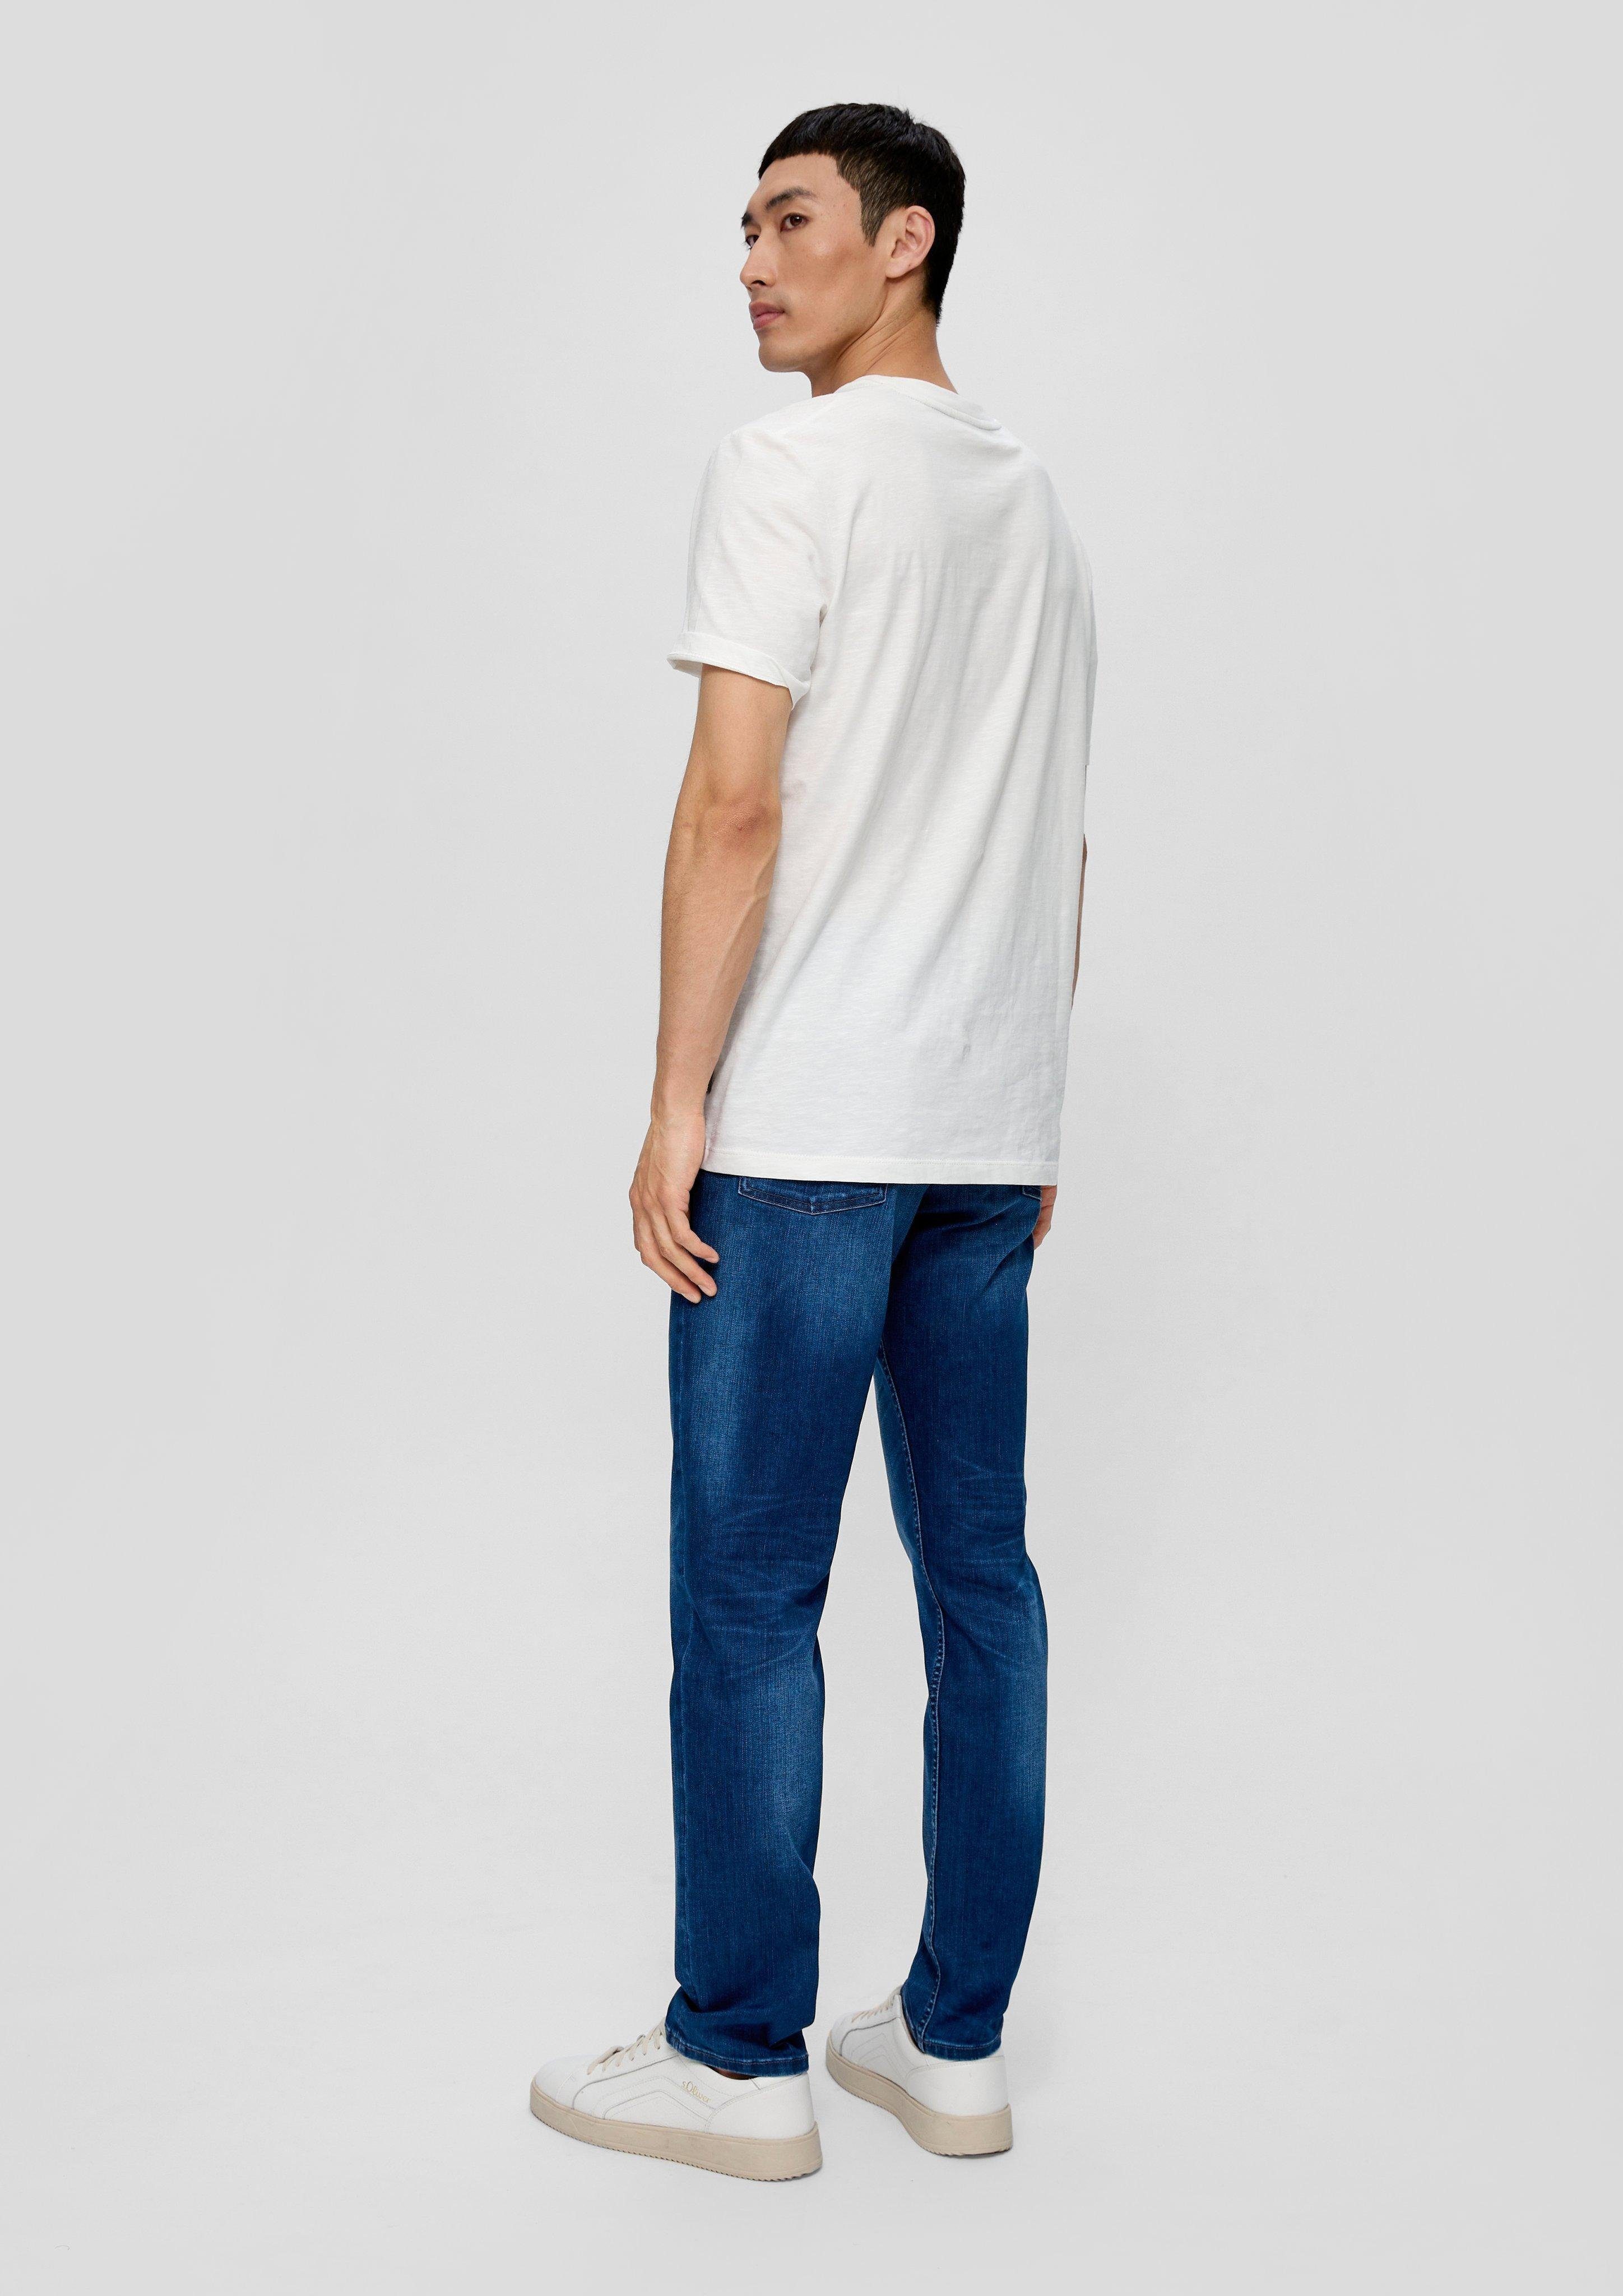 Patch Jeans dunkelblau Stoffhose Label Rise s.Oliver Straight Label-Patch / Slim / Waschung, Mid / Fit Leg / Keith